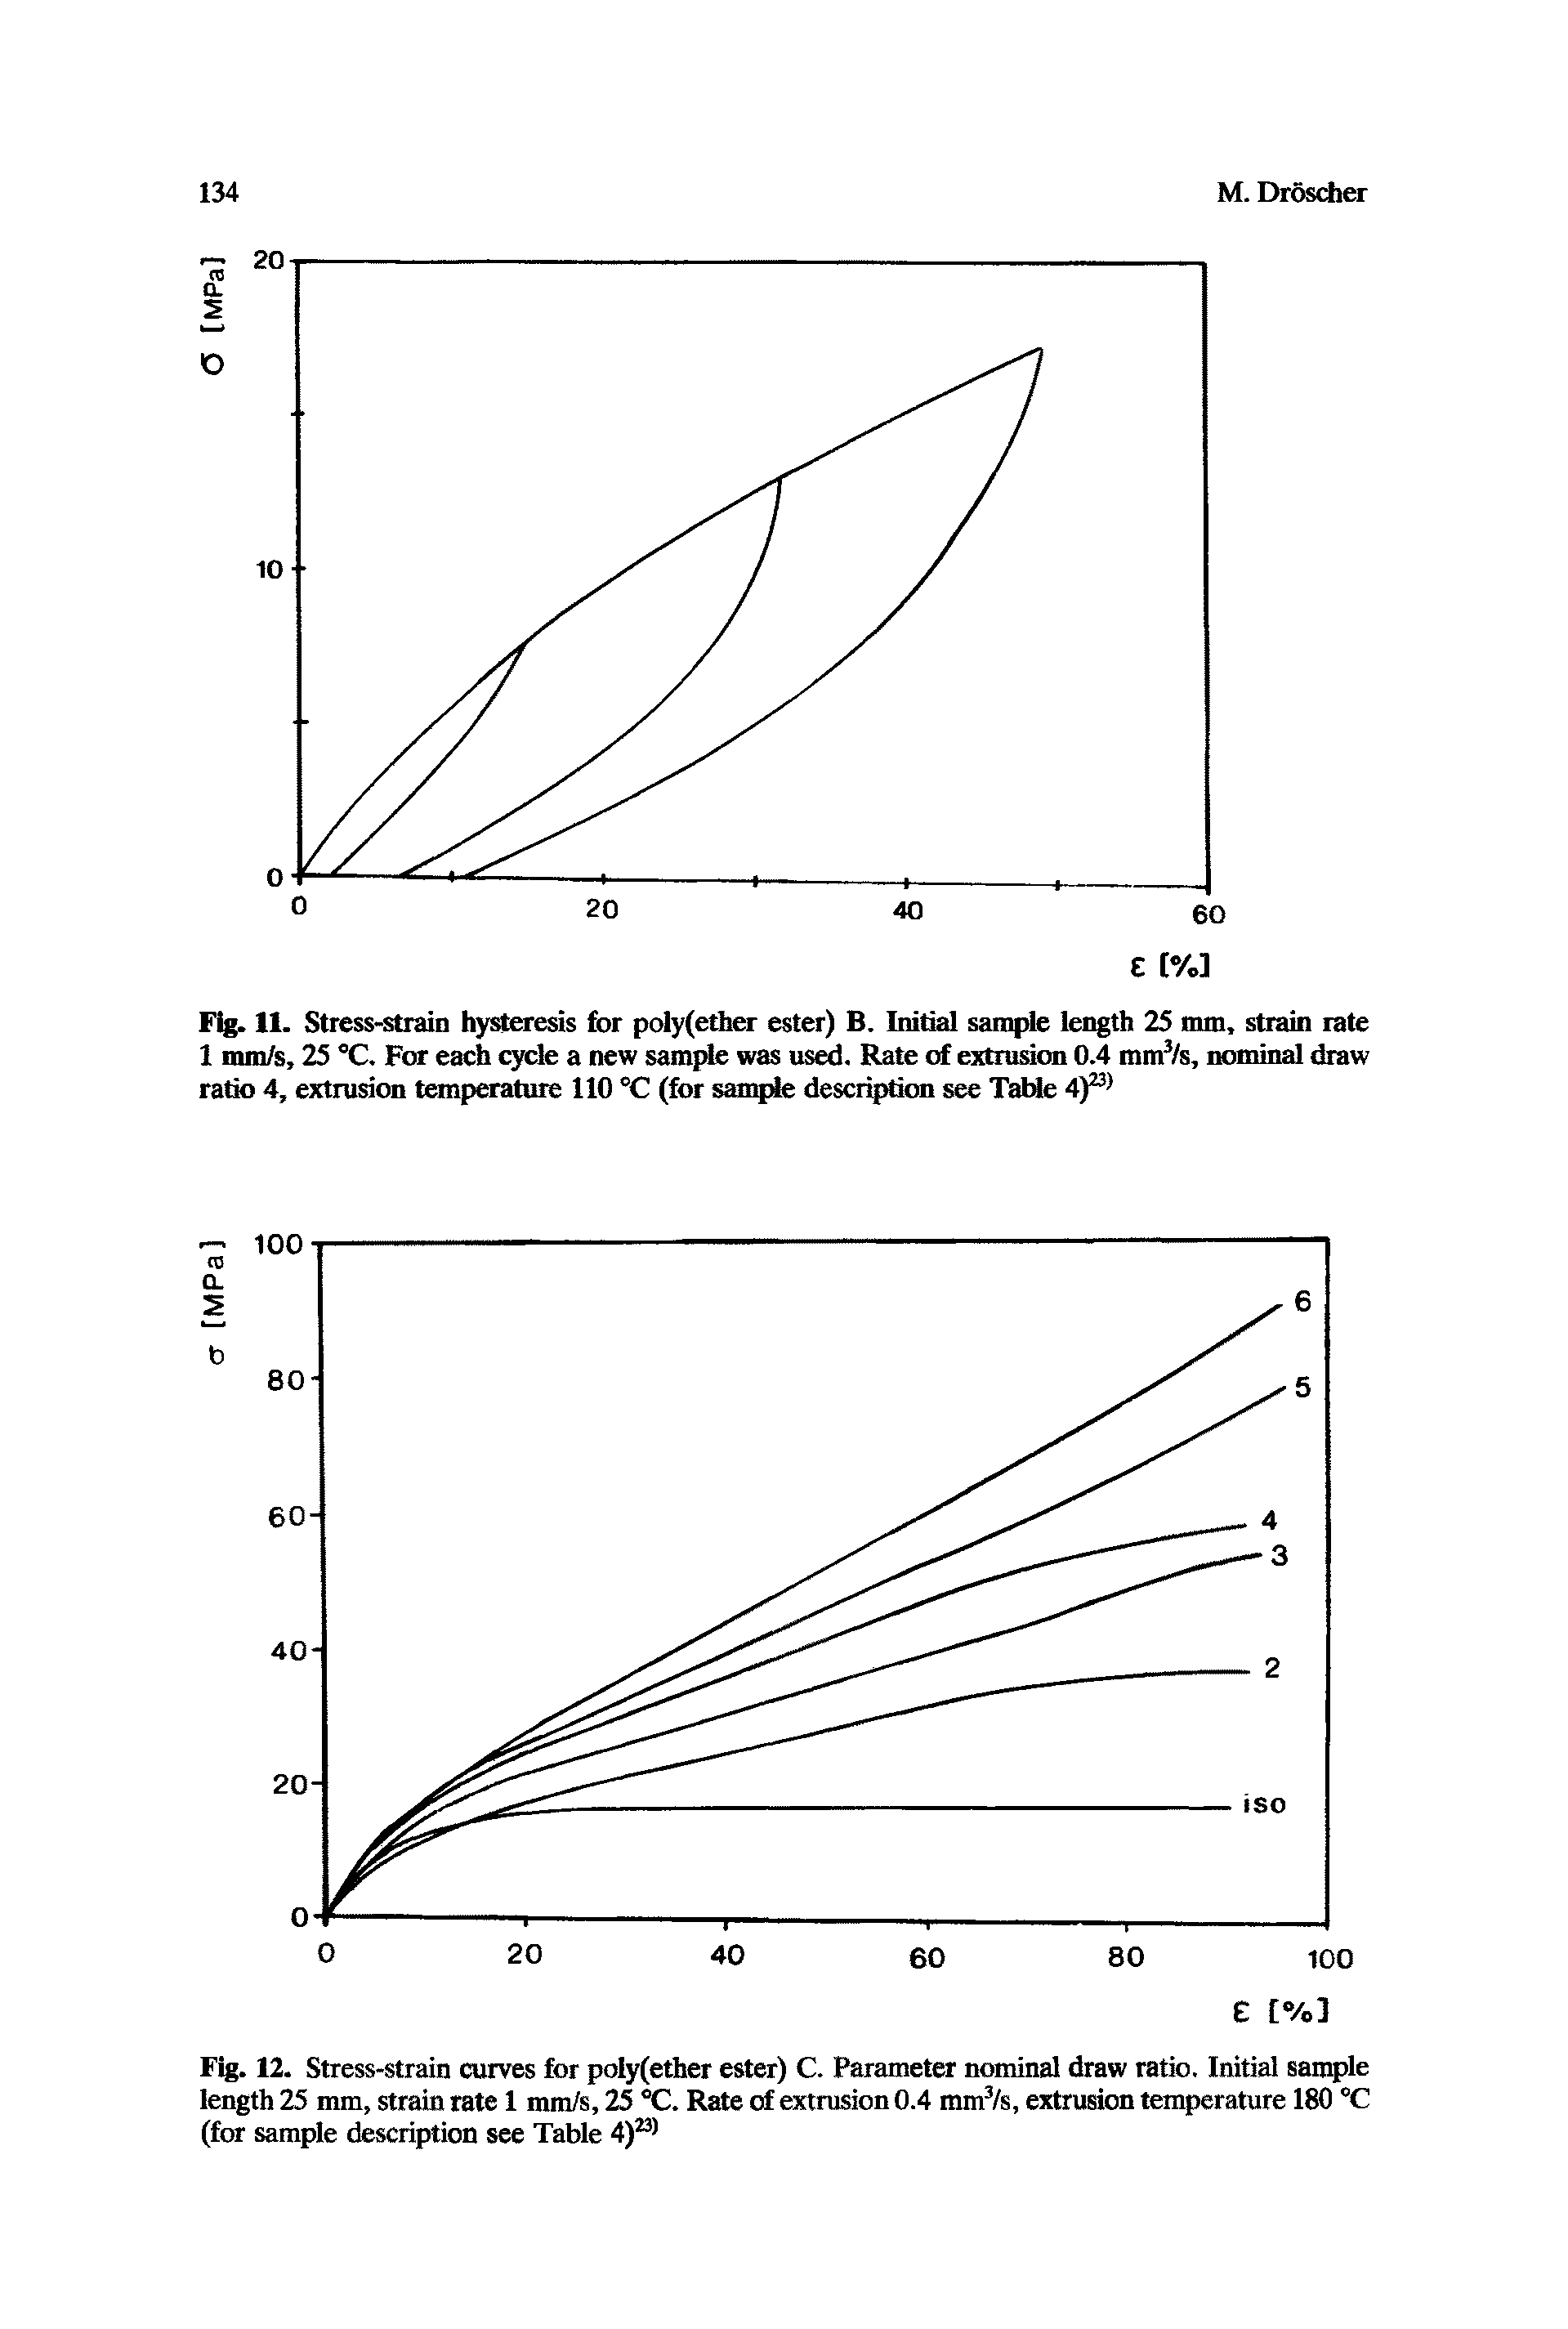 Fig. 11. Stress-strain hysteresis for poly(ether ester) B. Initial sample length 25 mm, strain rate 1 mm/s, 25 °C. For each cycle a new sample was used. Rate of extrusion 0.4 mm /s, nominal draw ratio 4, extrusion tem[ rature 110 °C (for sam description see TaMe 4) ...